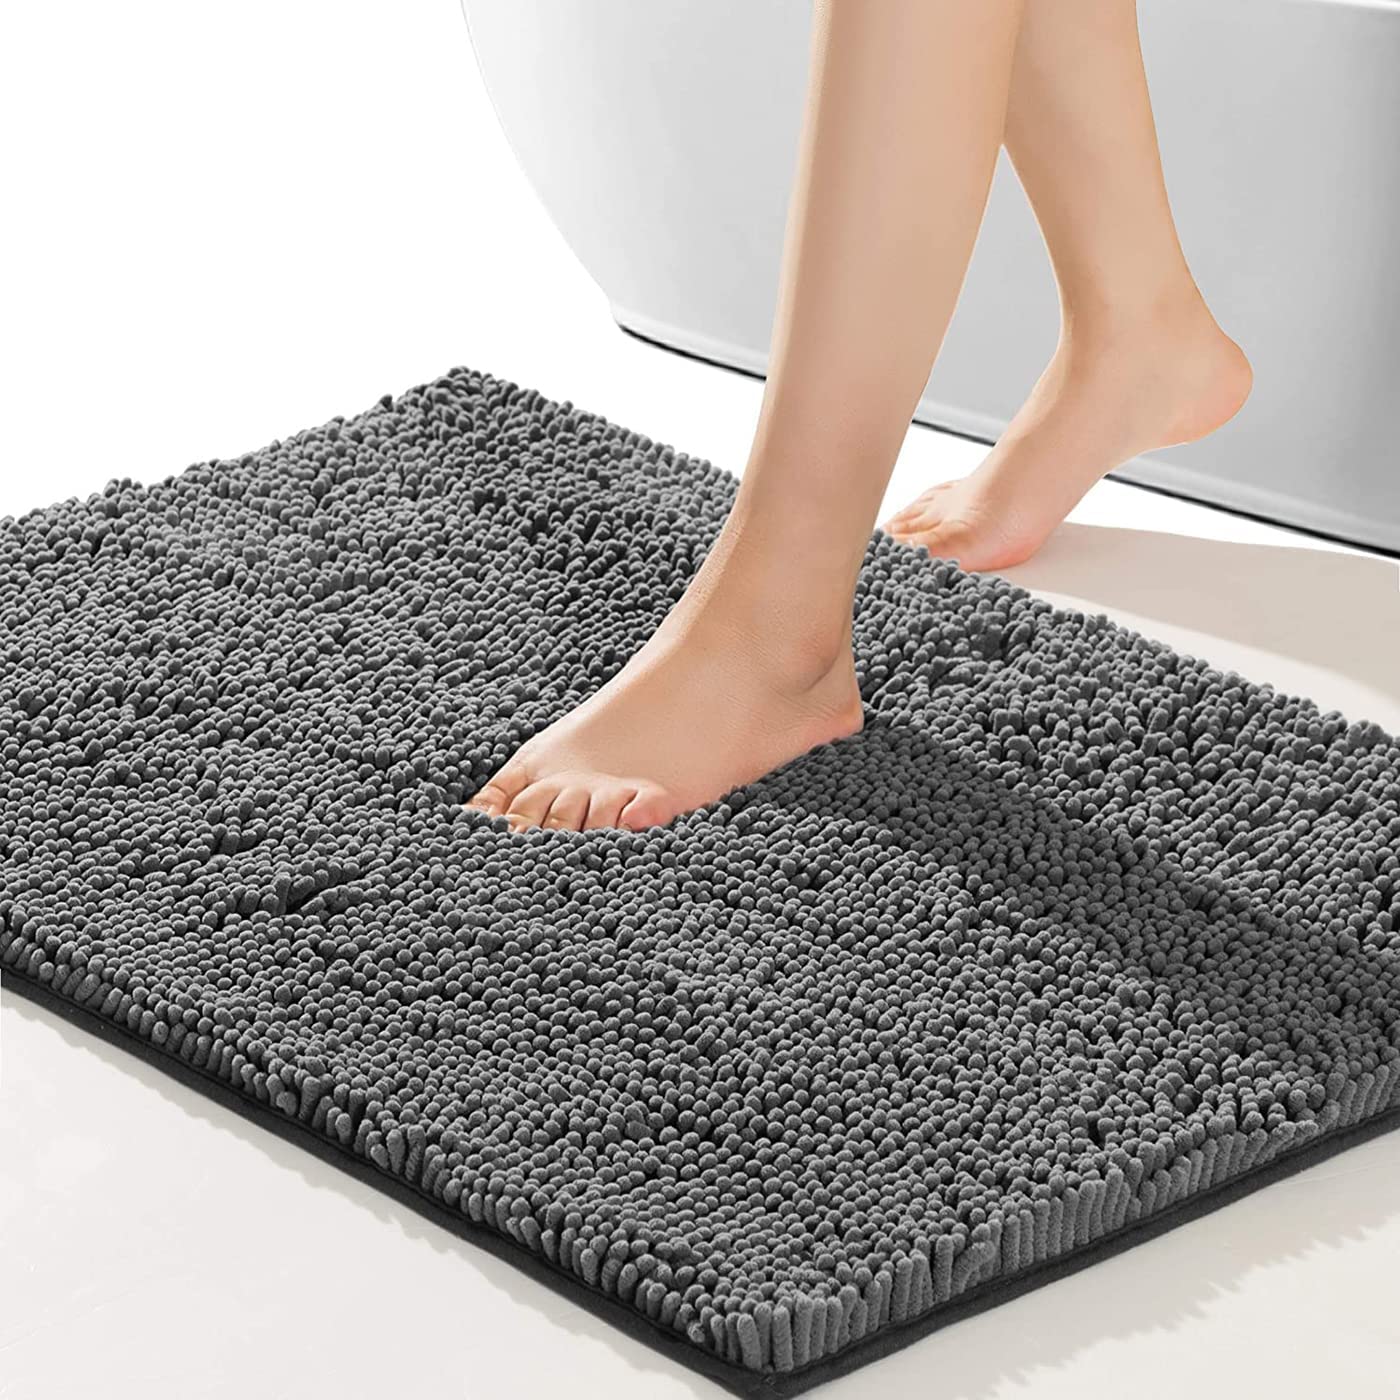 SONORO KATE Thick, Non-Slip Bath Mat Makes Your Feet Sinking into Softness